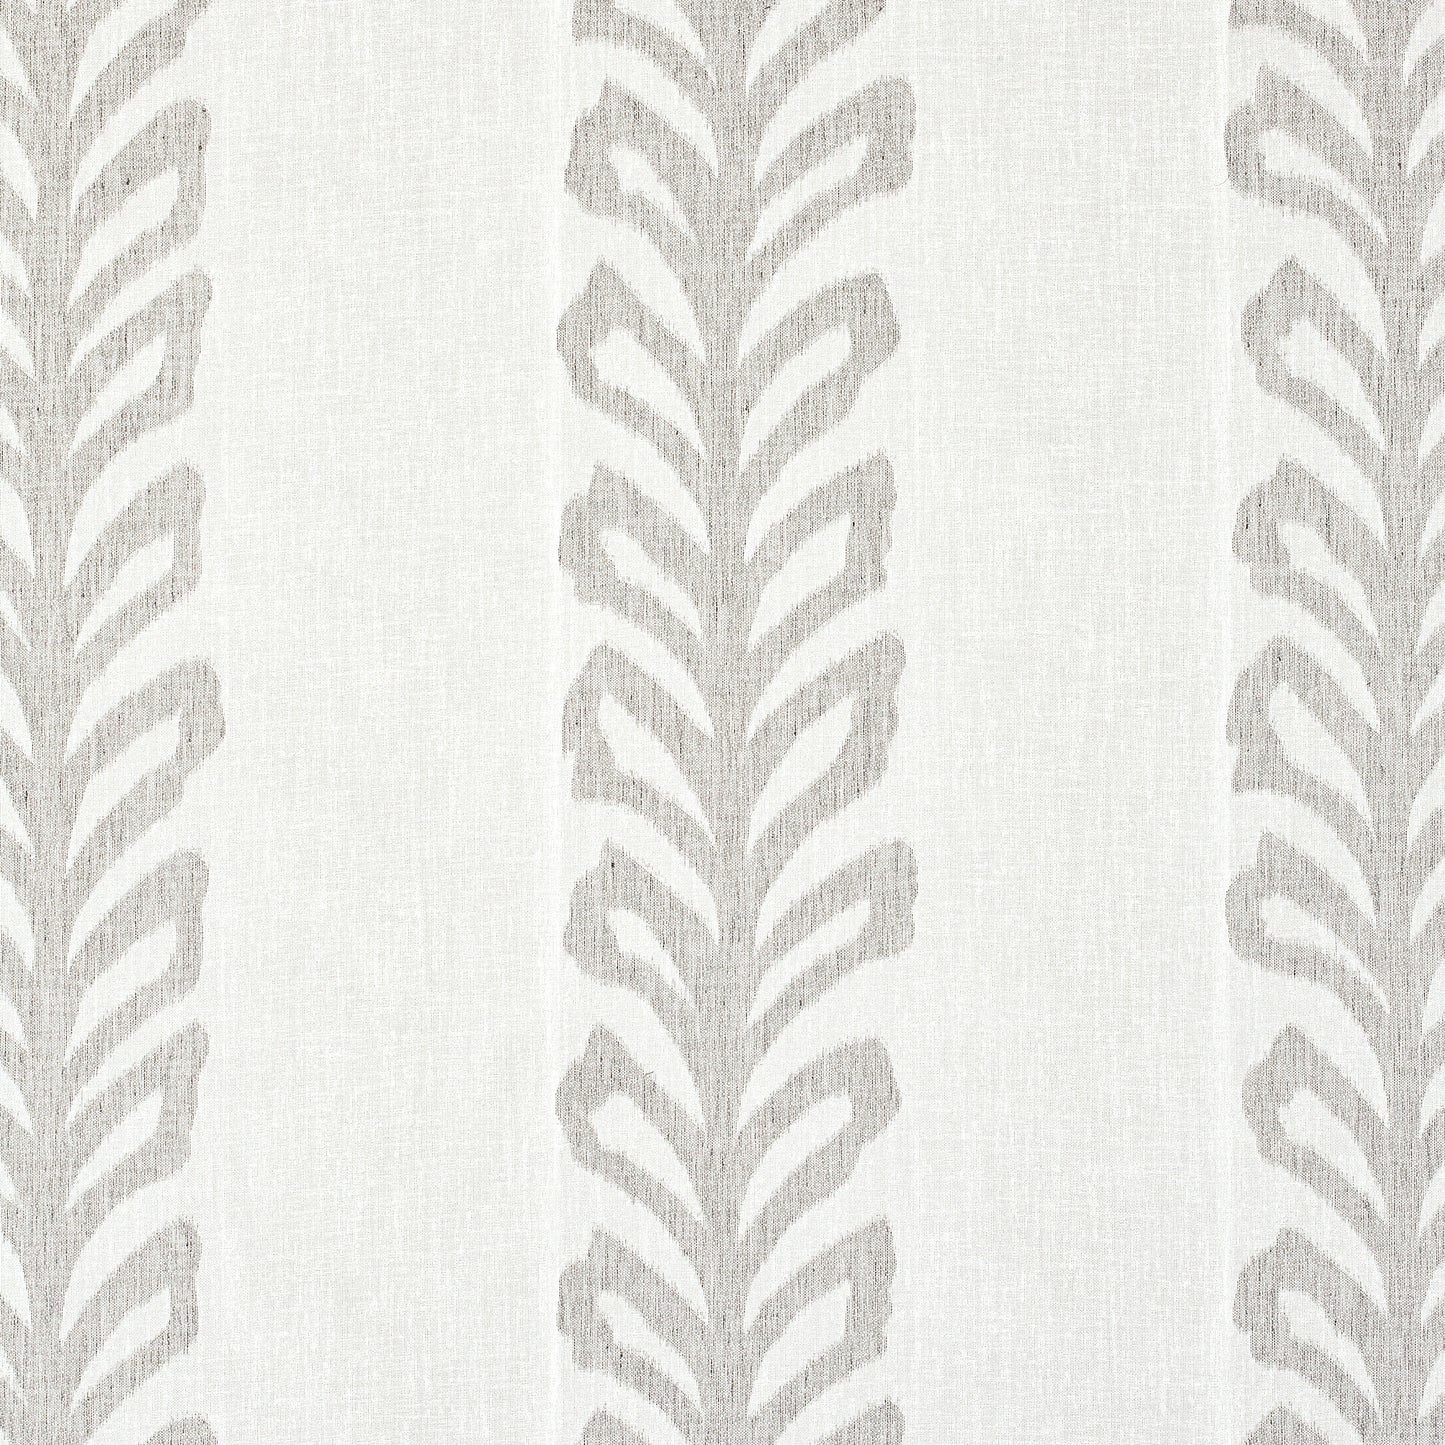 Purchase Thibaut Fabric Product FWW7146 pattern name Lenox Sheer color Smoke